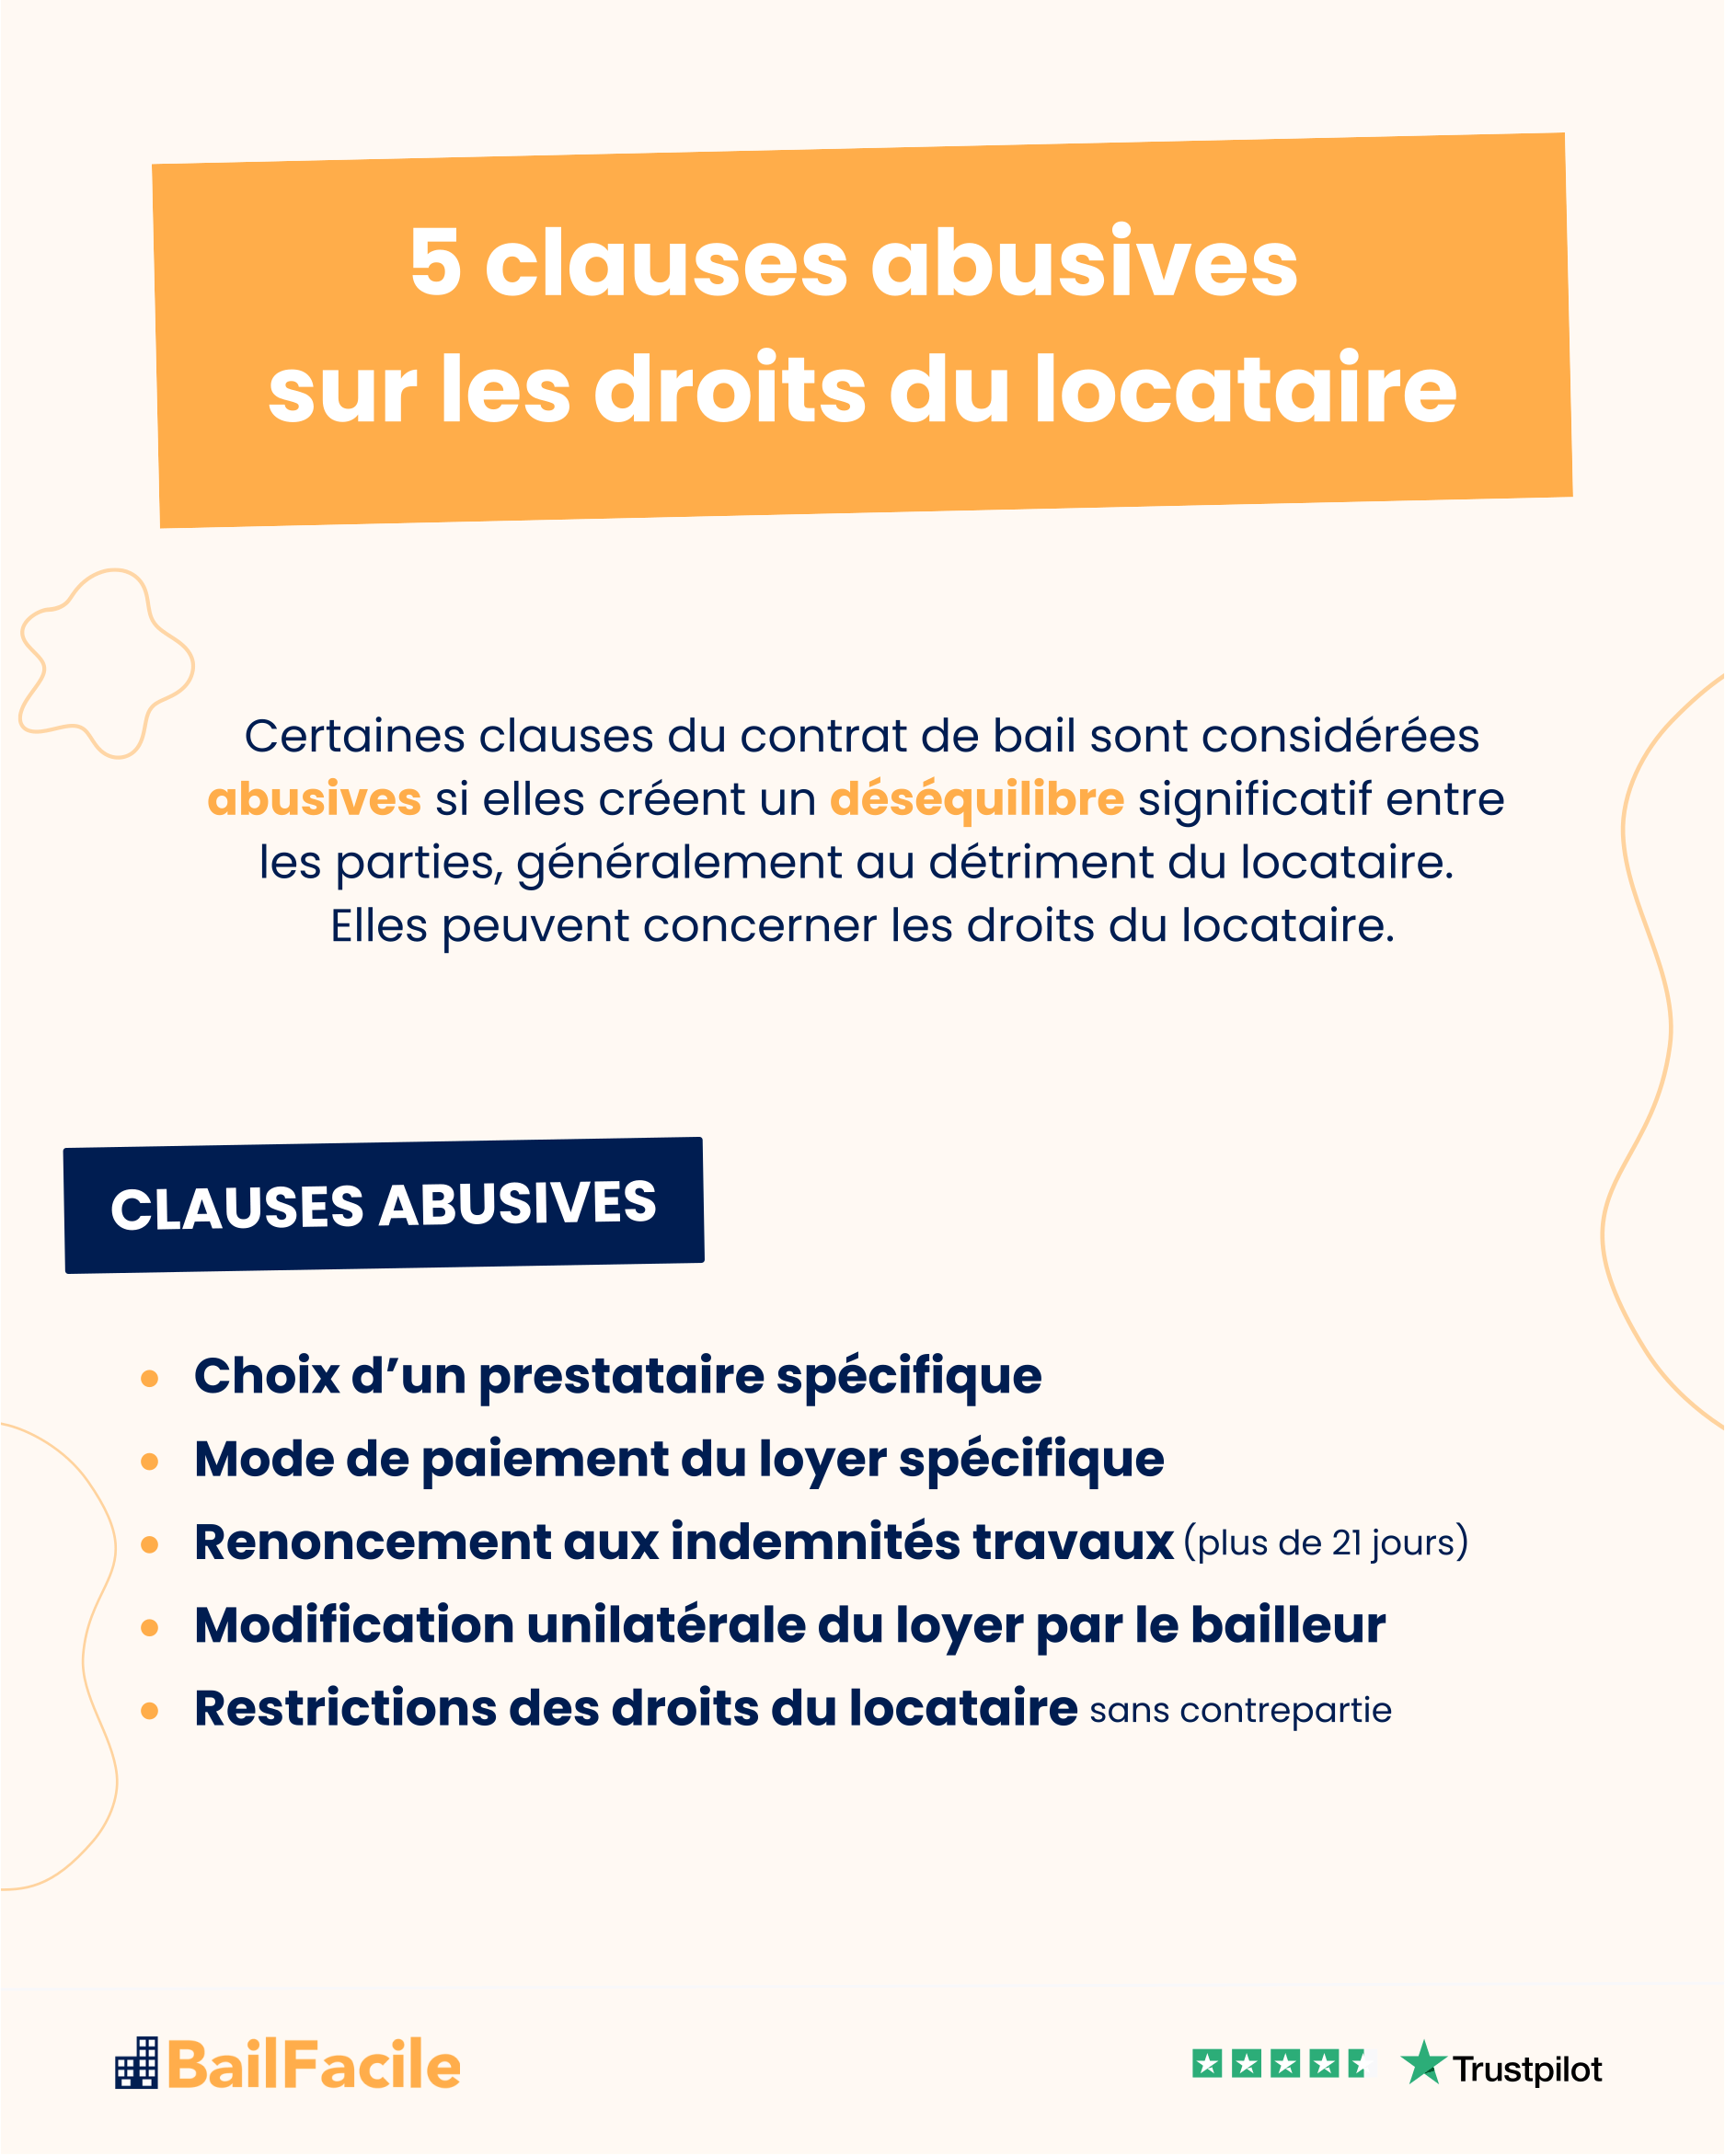 clauses abusives droit locataire